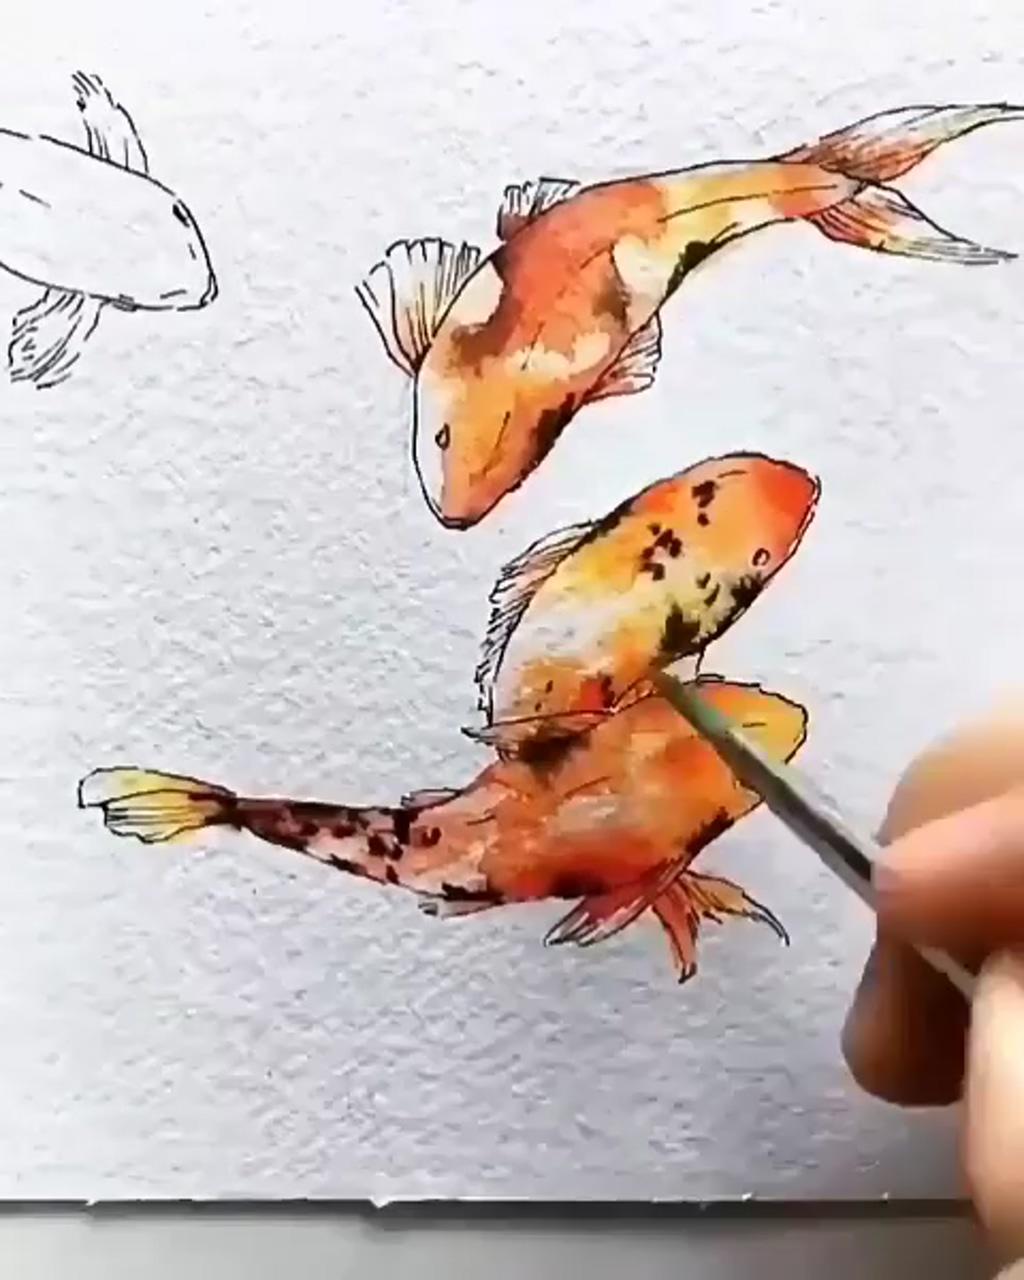 Watch the coloring process; watercolor painting techniques